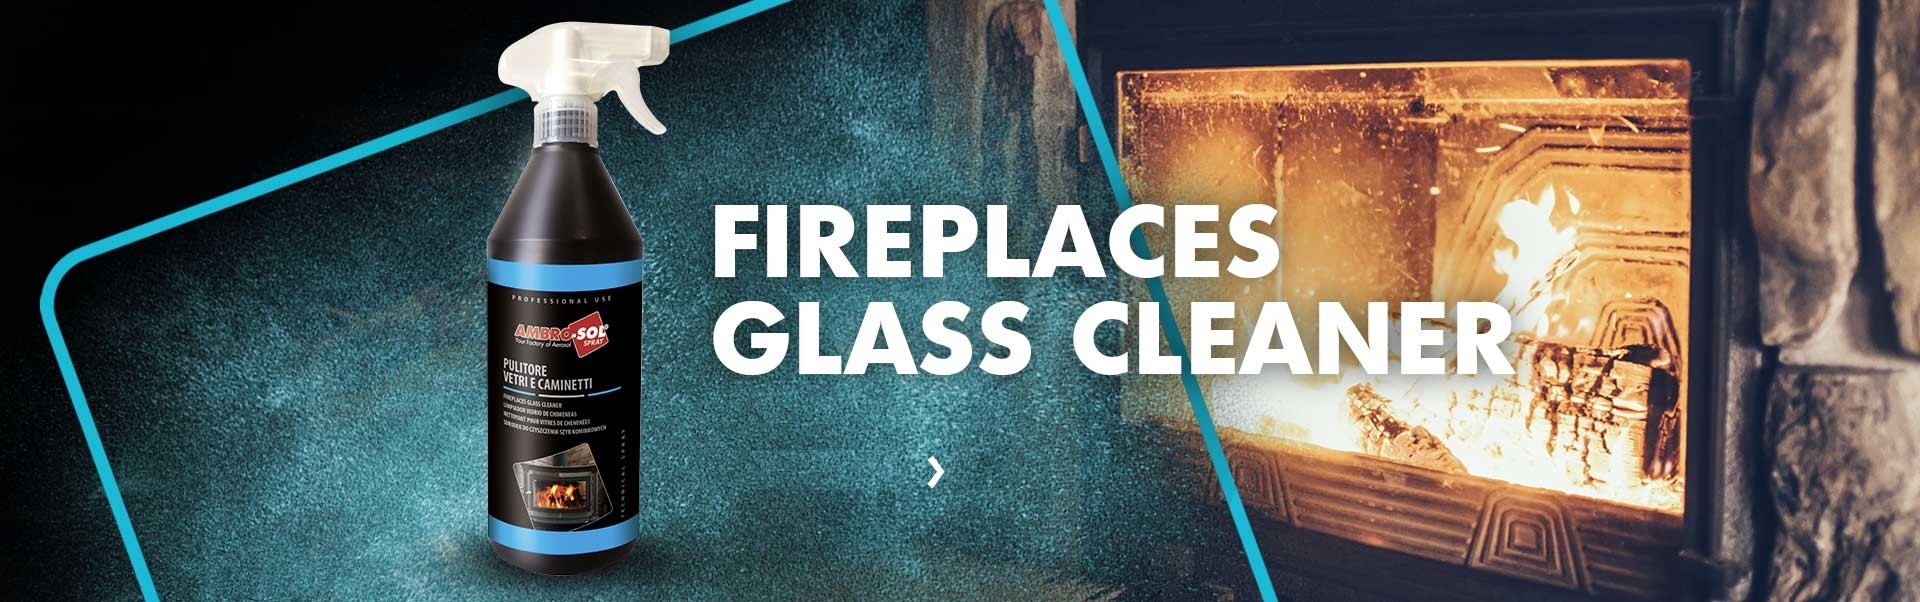 Fireplace Glass Cleaner Spray